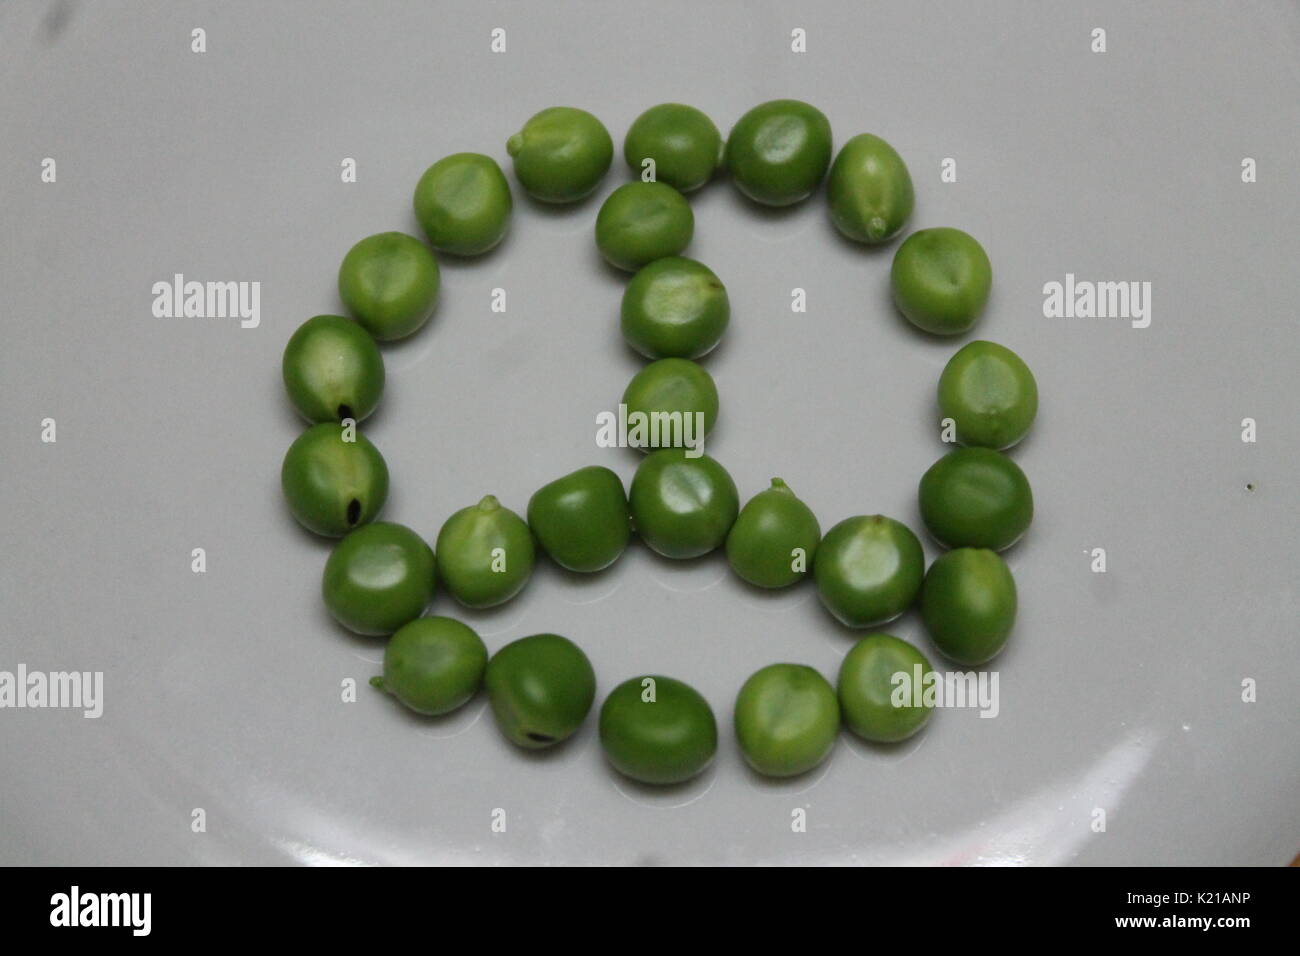 young sweet green color peas lay in symbol of peace prepare for cooking Stock Photo